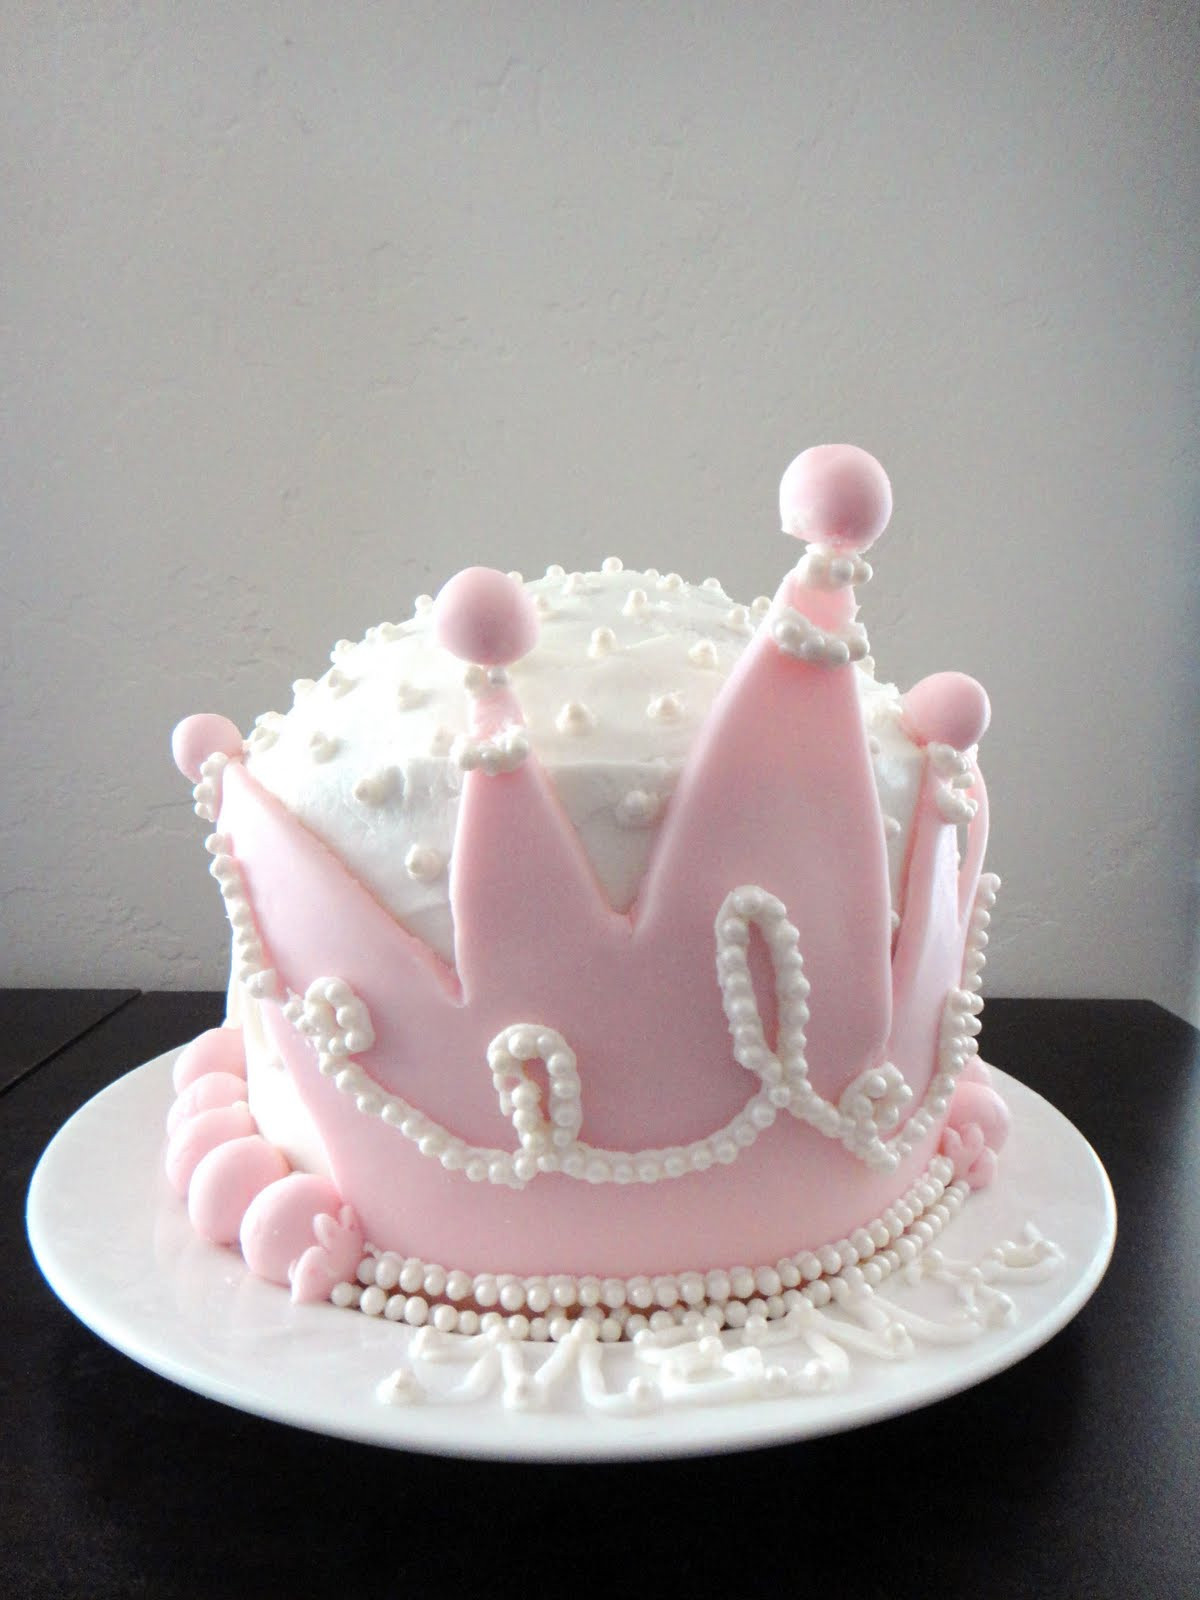 Crown Birthday Cake
 Worth Pinning A Cake Fit for a Queen